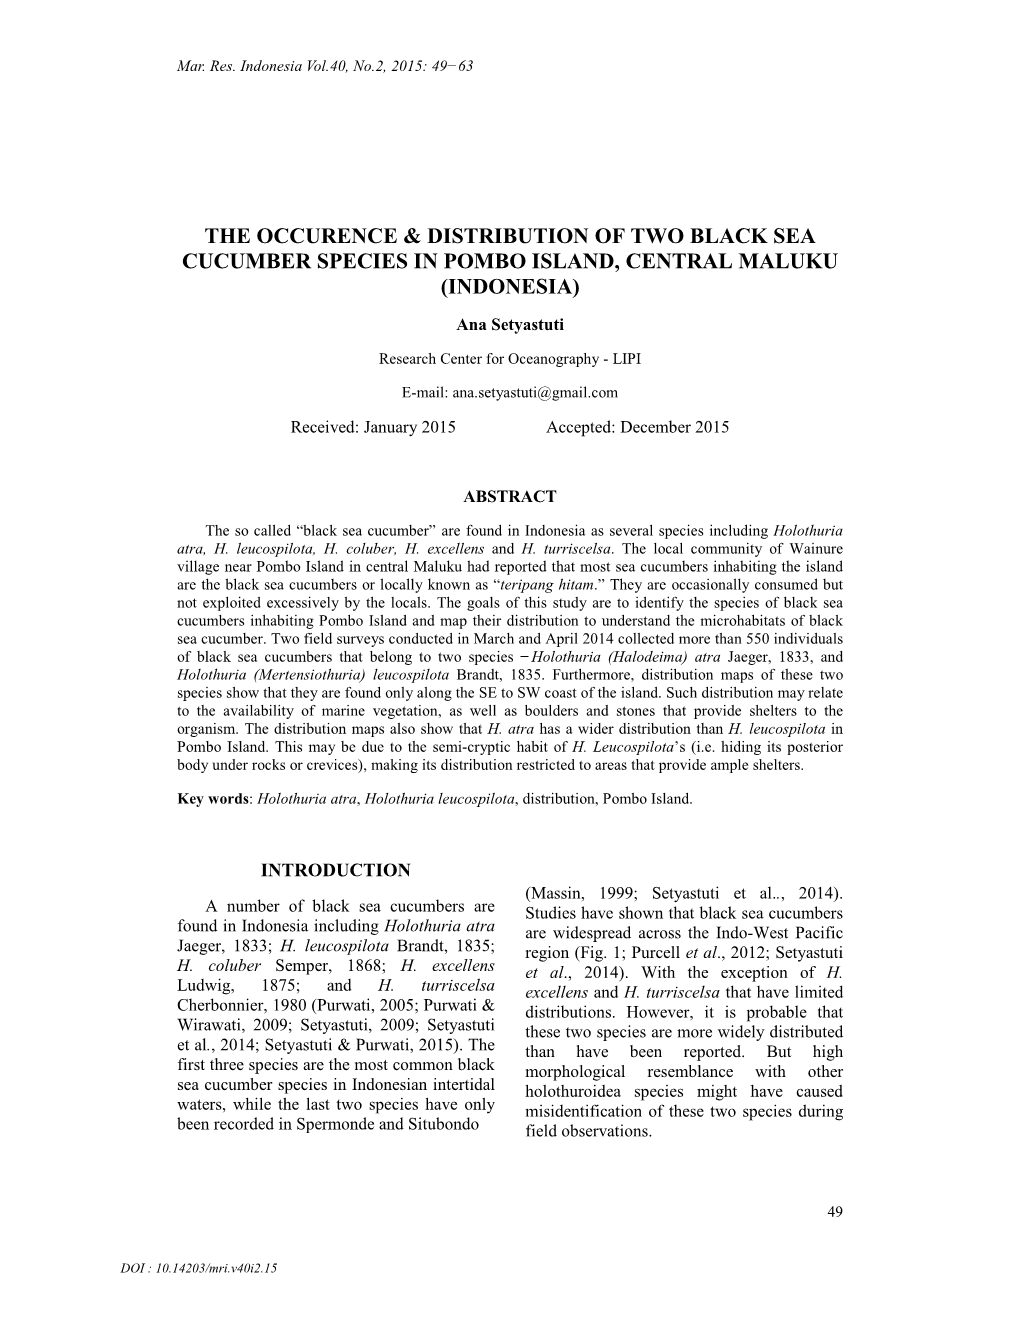 The Occurence & Distribution of Two Black Sea Cucumber Species In